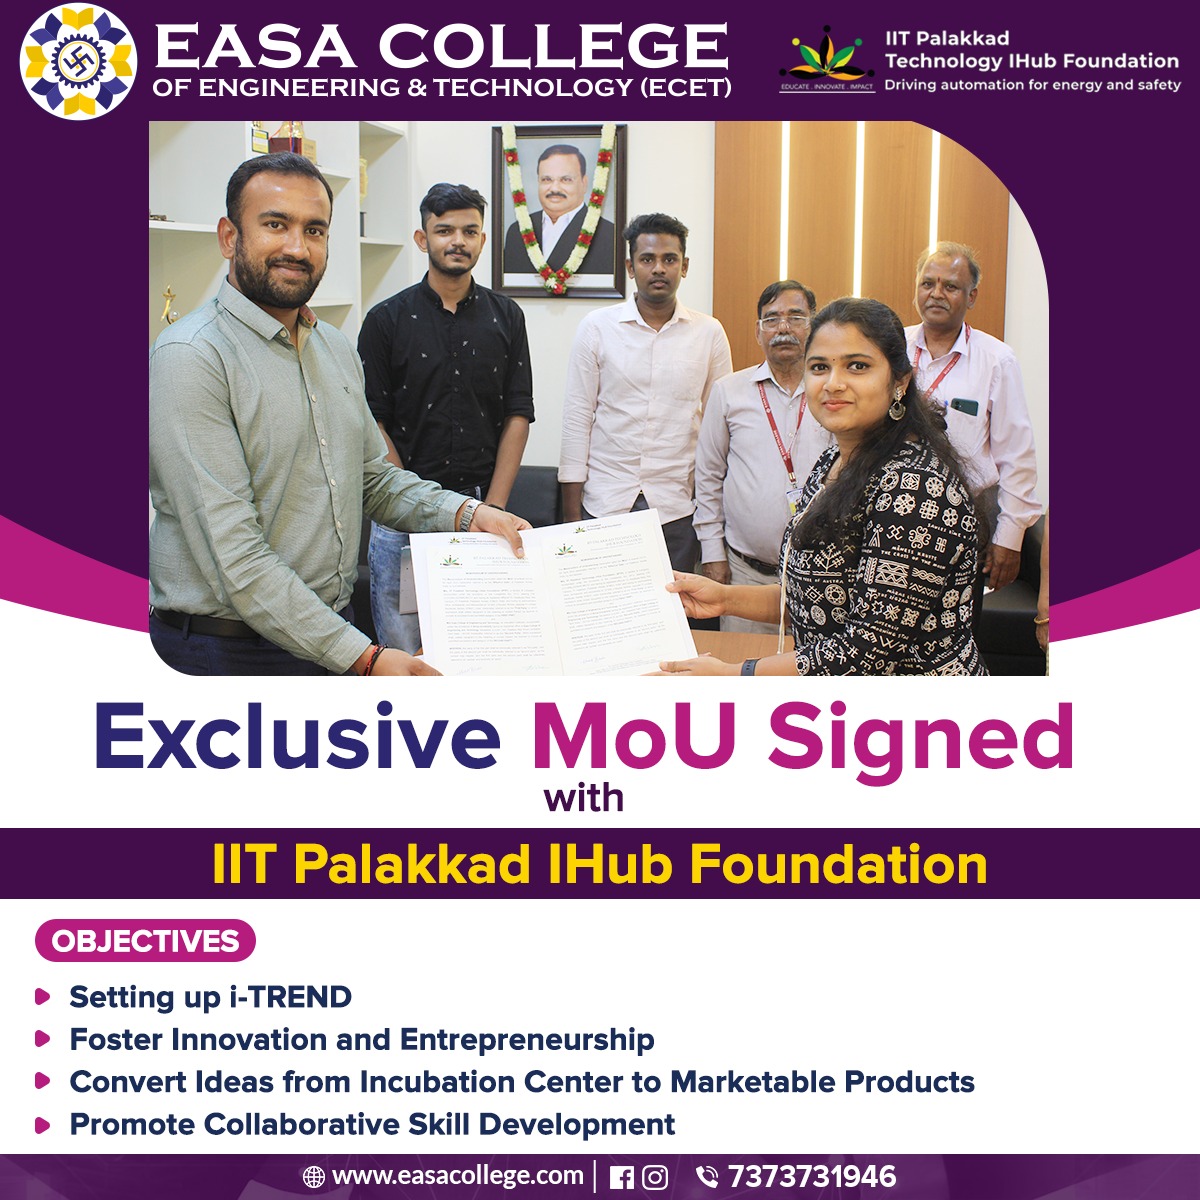 MoU Singed With IIT Palakkad